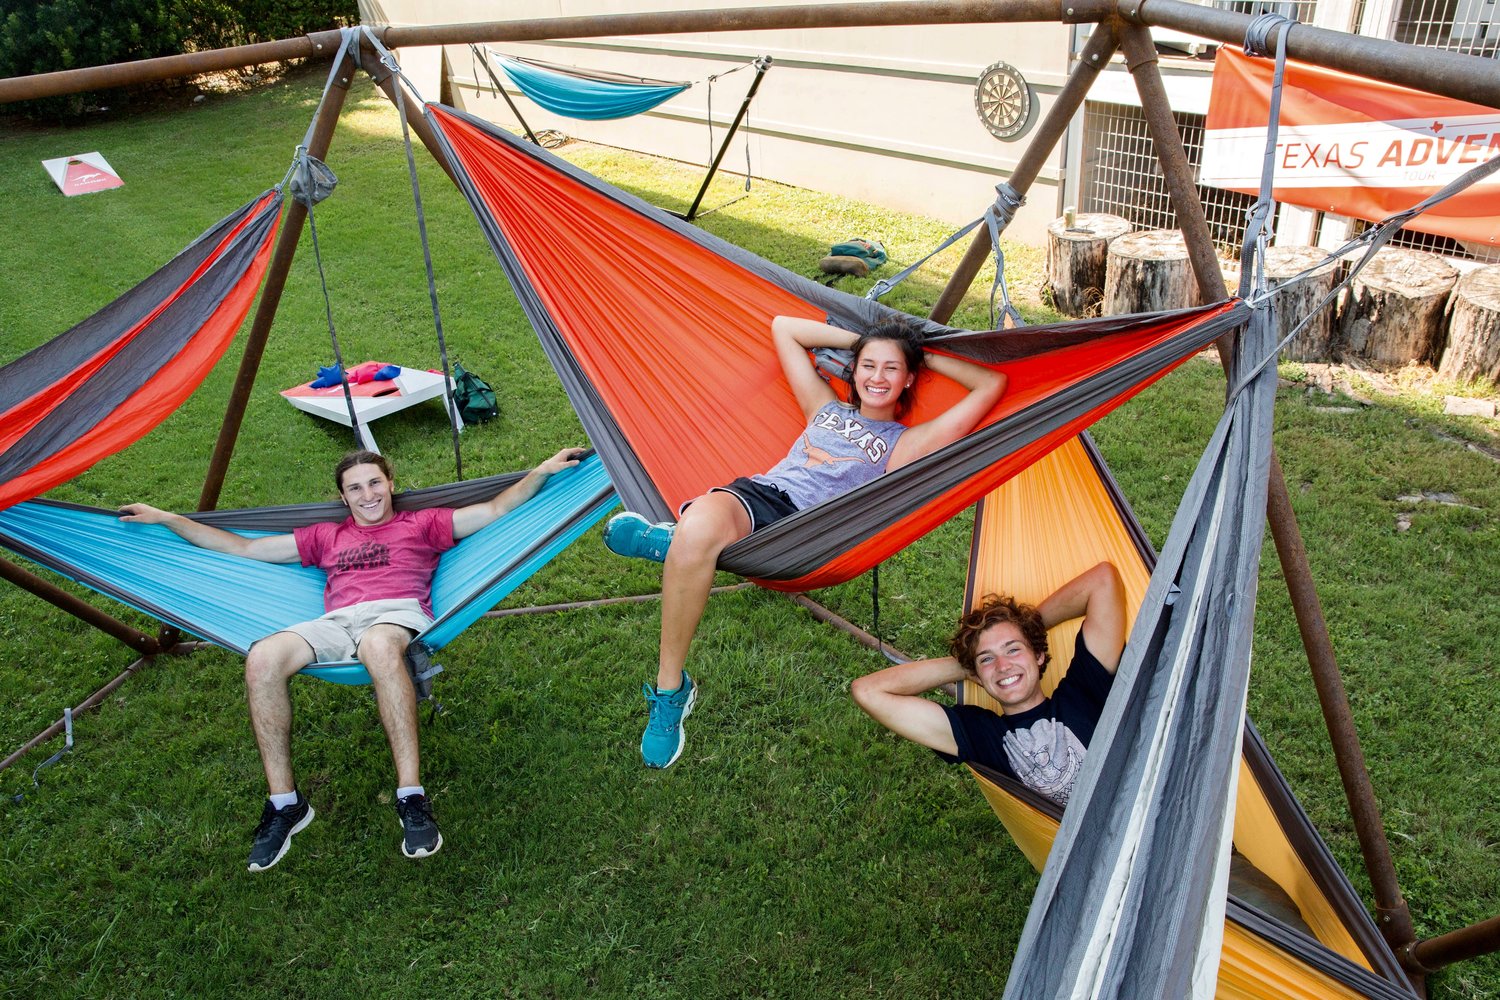 Members of the Nido Structures Team Zane Lewin, Olivia Nguyen and Daniel Goodwin lounge in hammocks of their free-standing structure